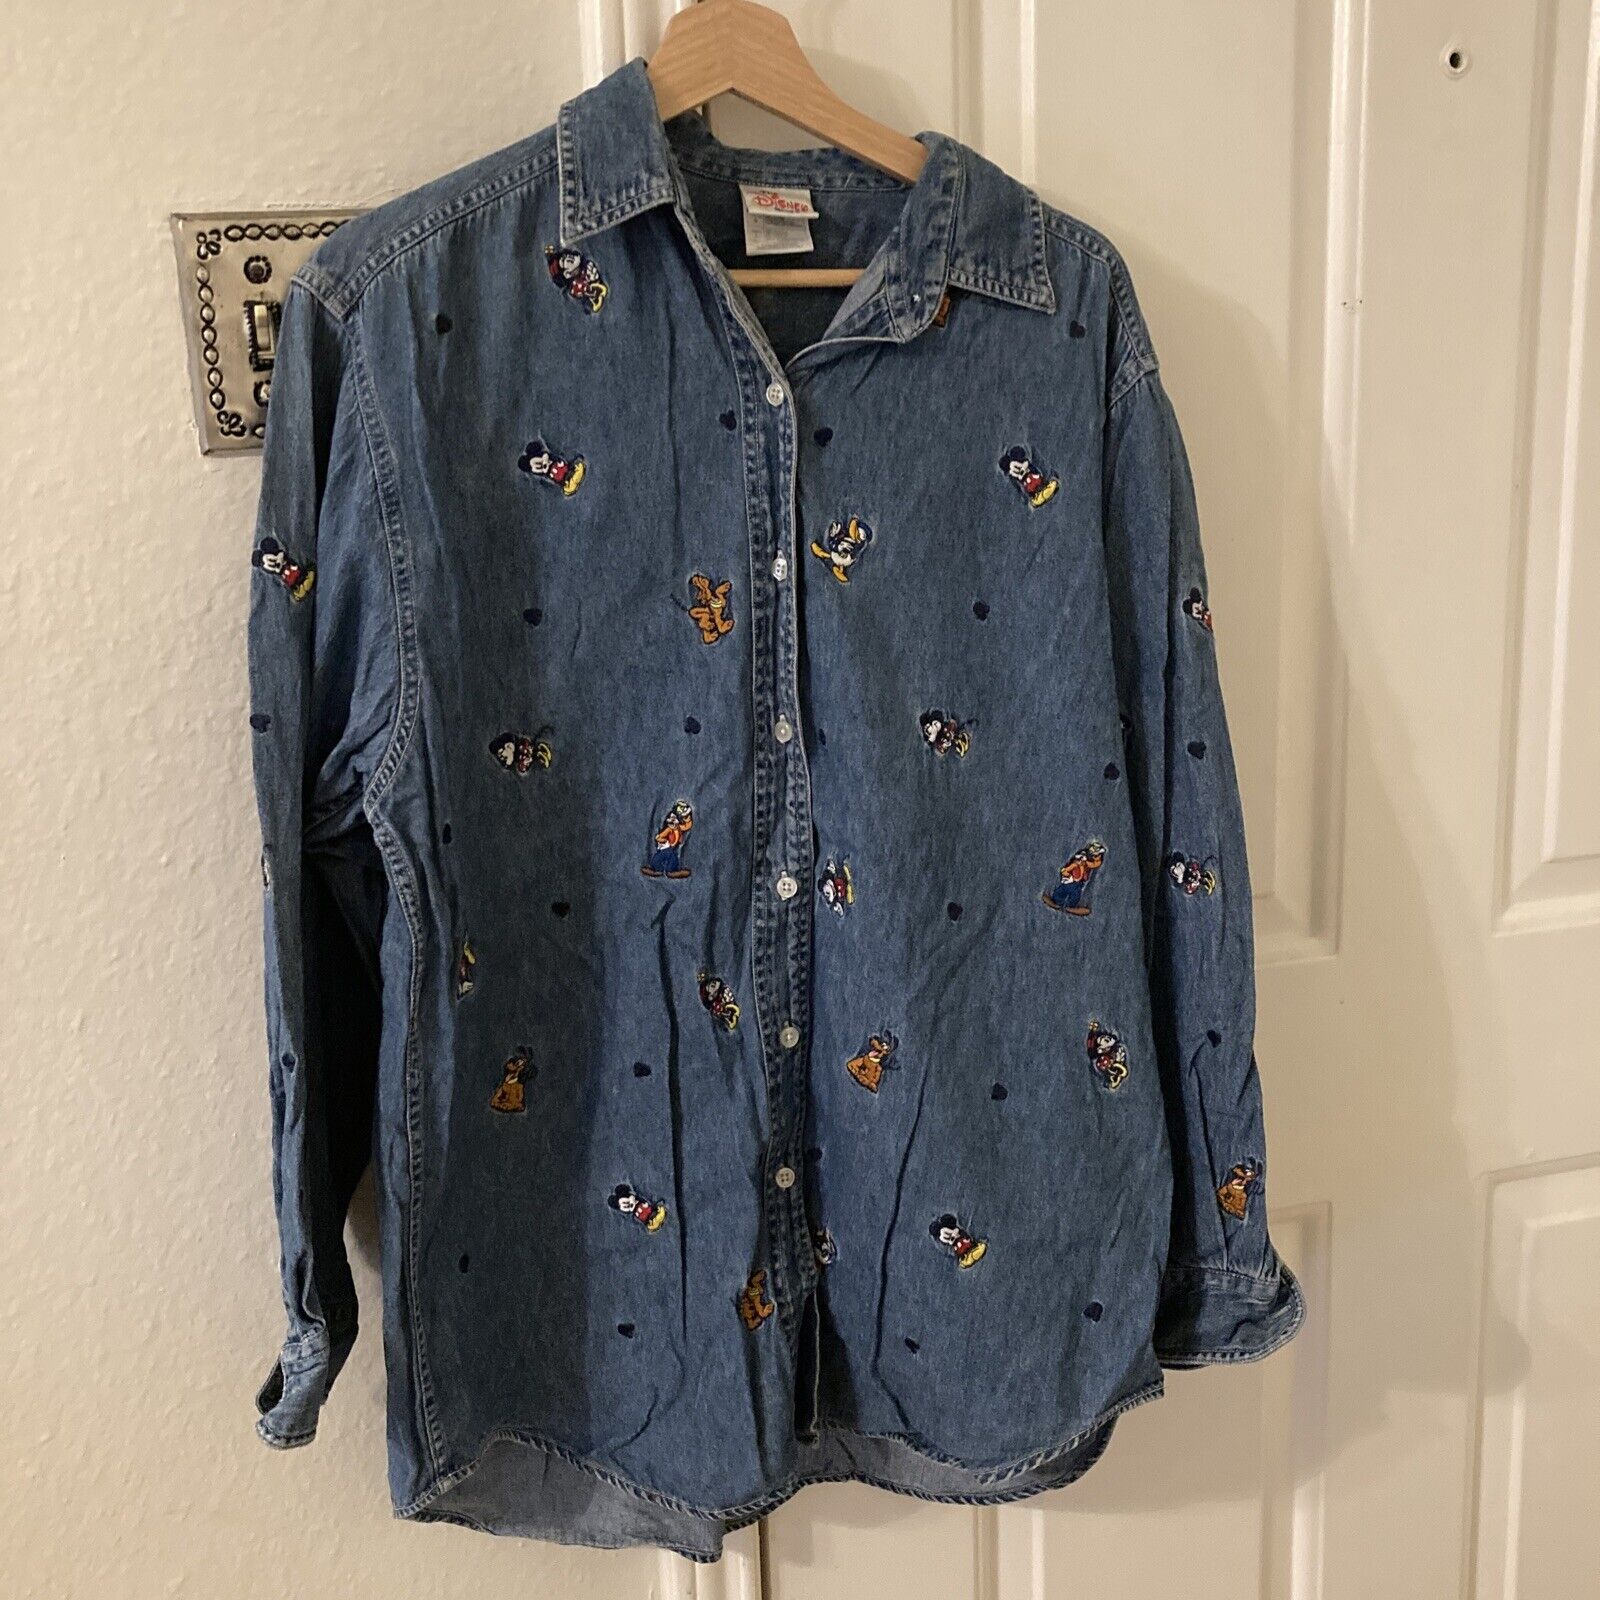 Vintage Denim Mickey Mouse Shirt L with embroidered Characters and Mickey Heads